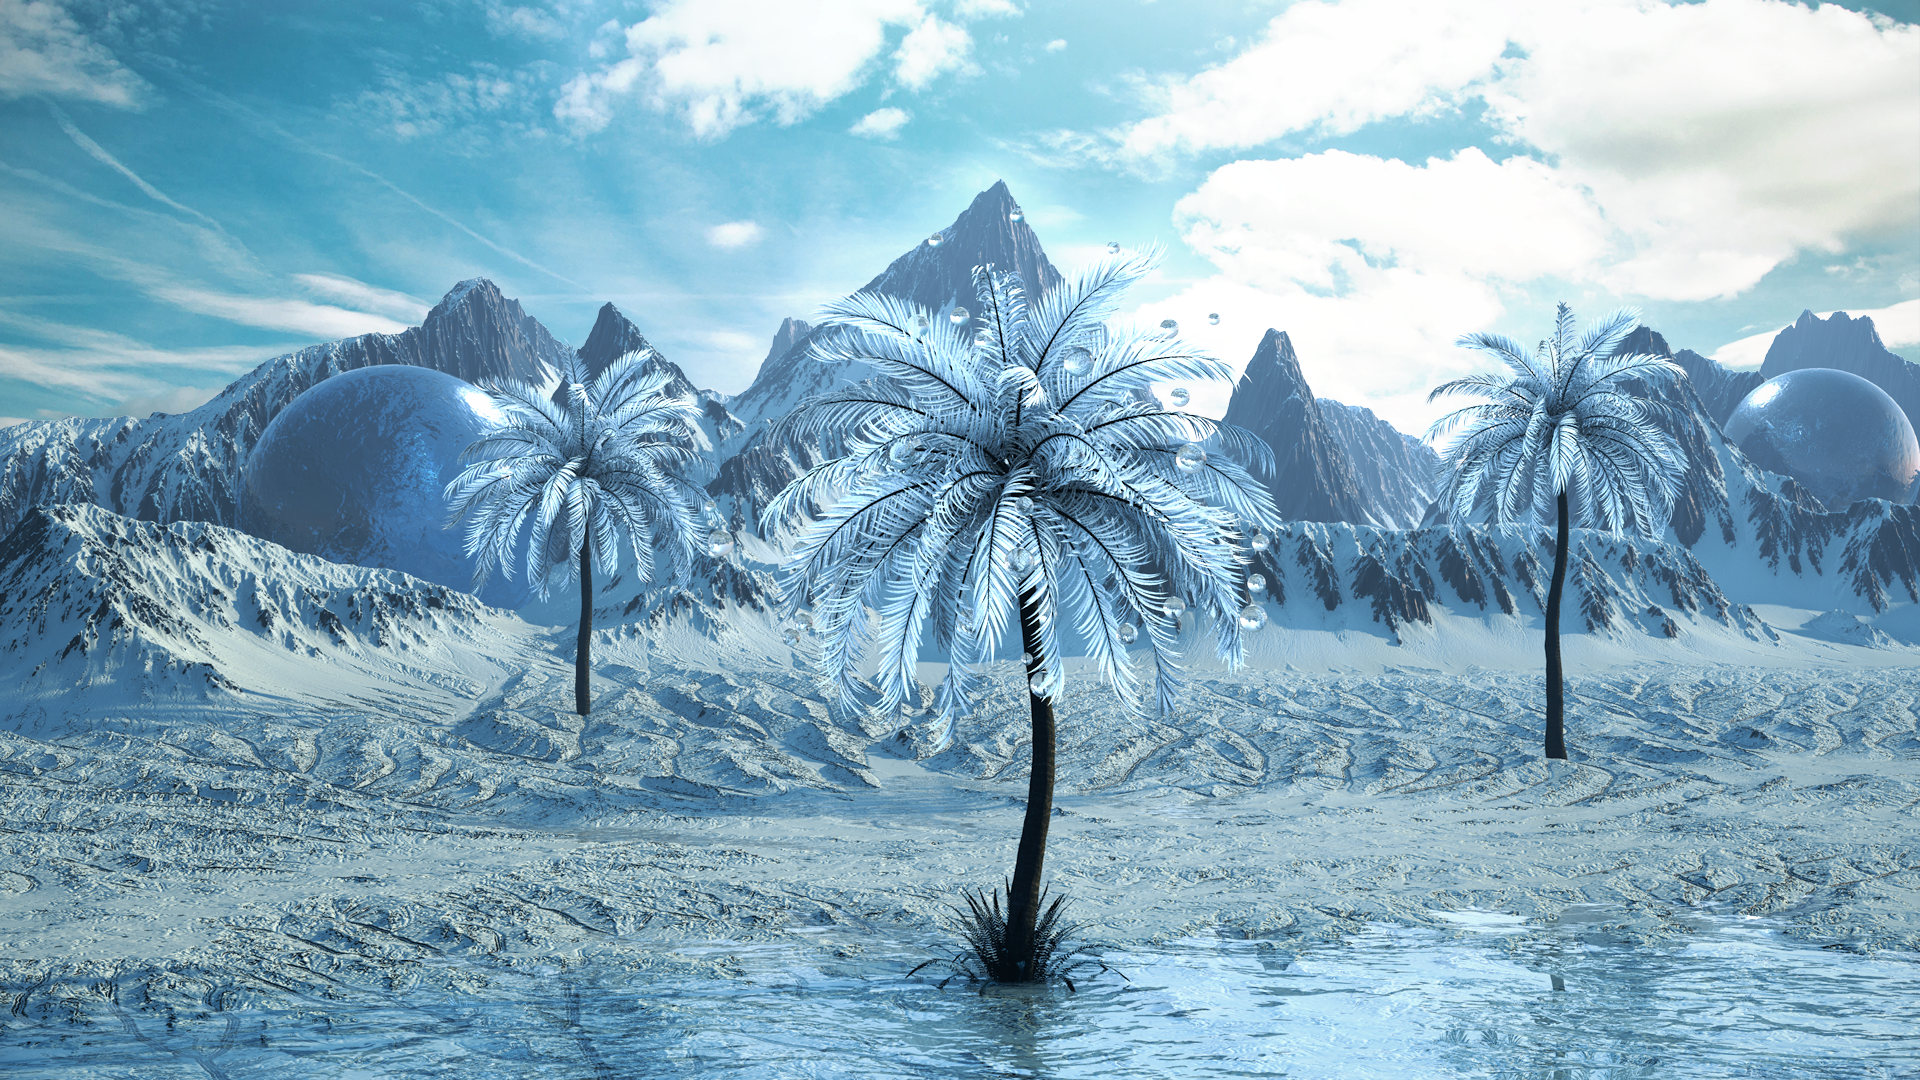 General 1920x1080 Cinema 4D landscape 3D Abstract digital art cyan ice frost snow mountains palm trees